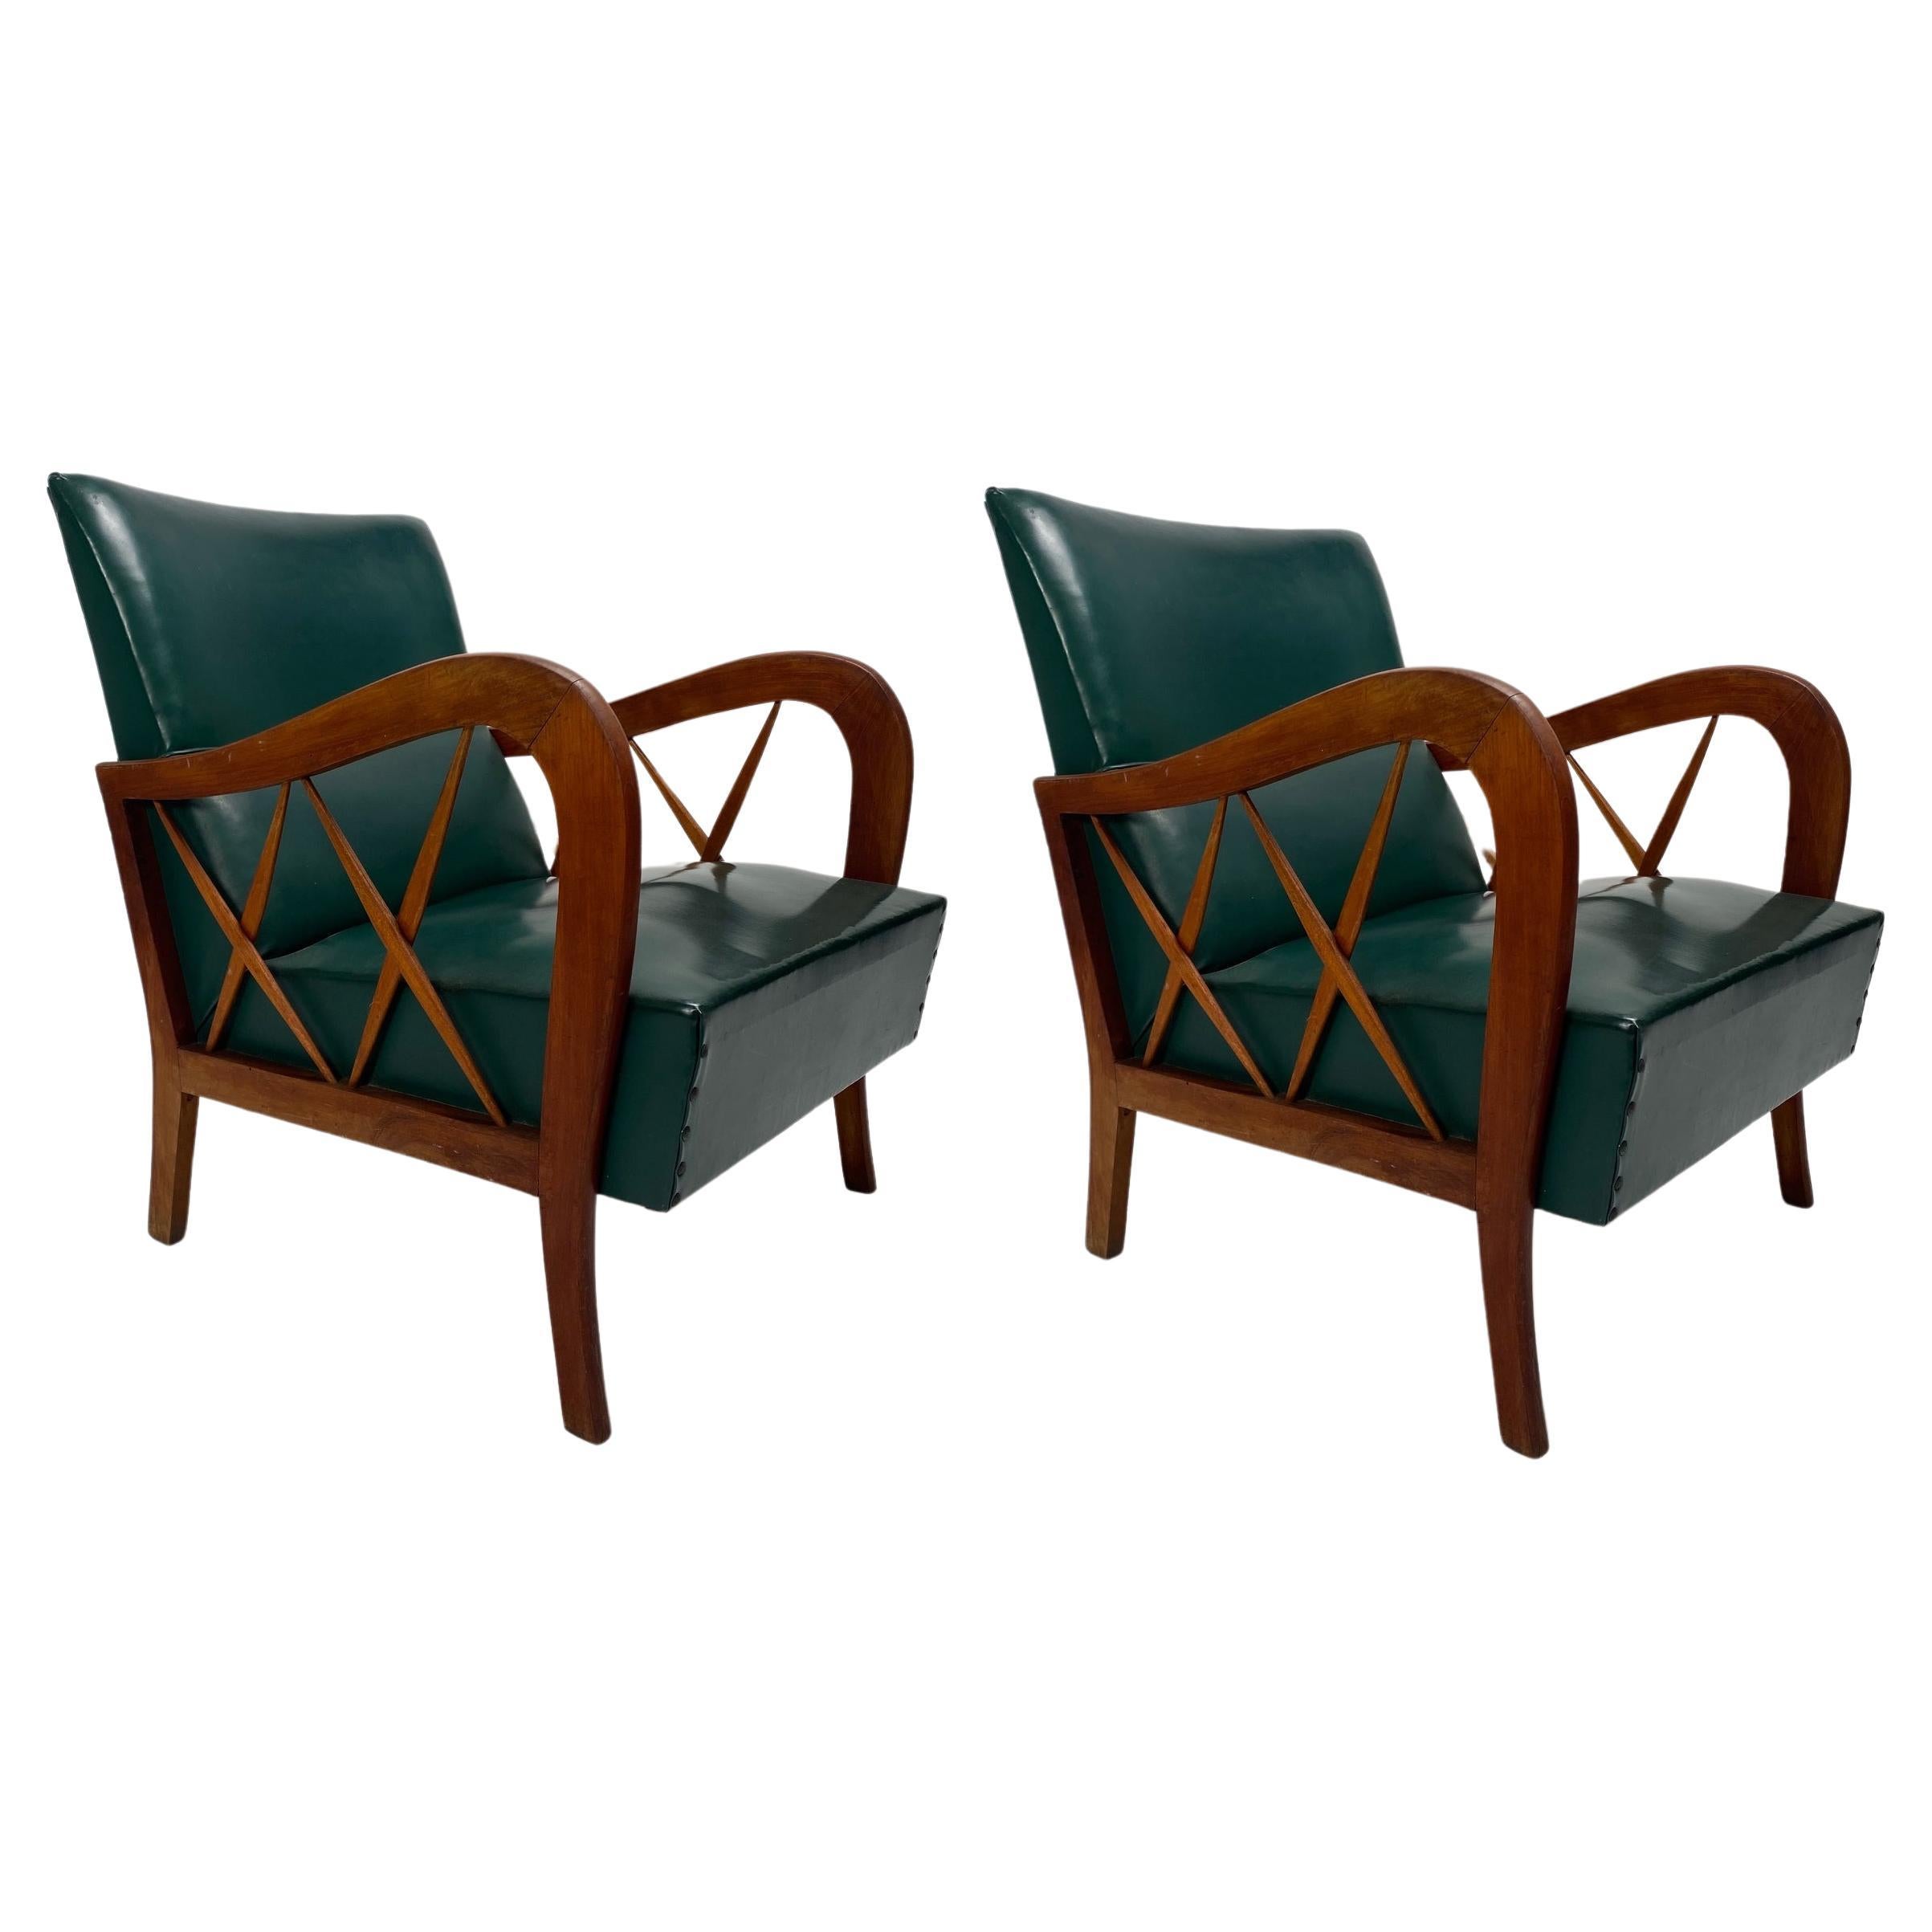 Pair of solid wood armchairs,  Paolo Buffa (Attr.), Italy 1950s (Customizable)